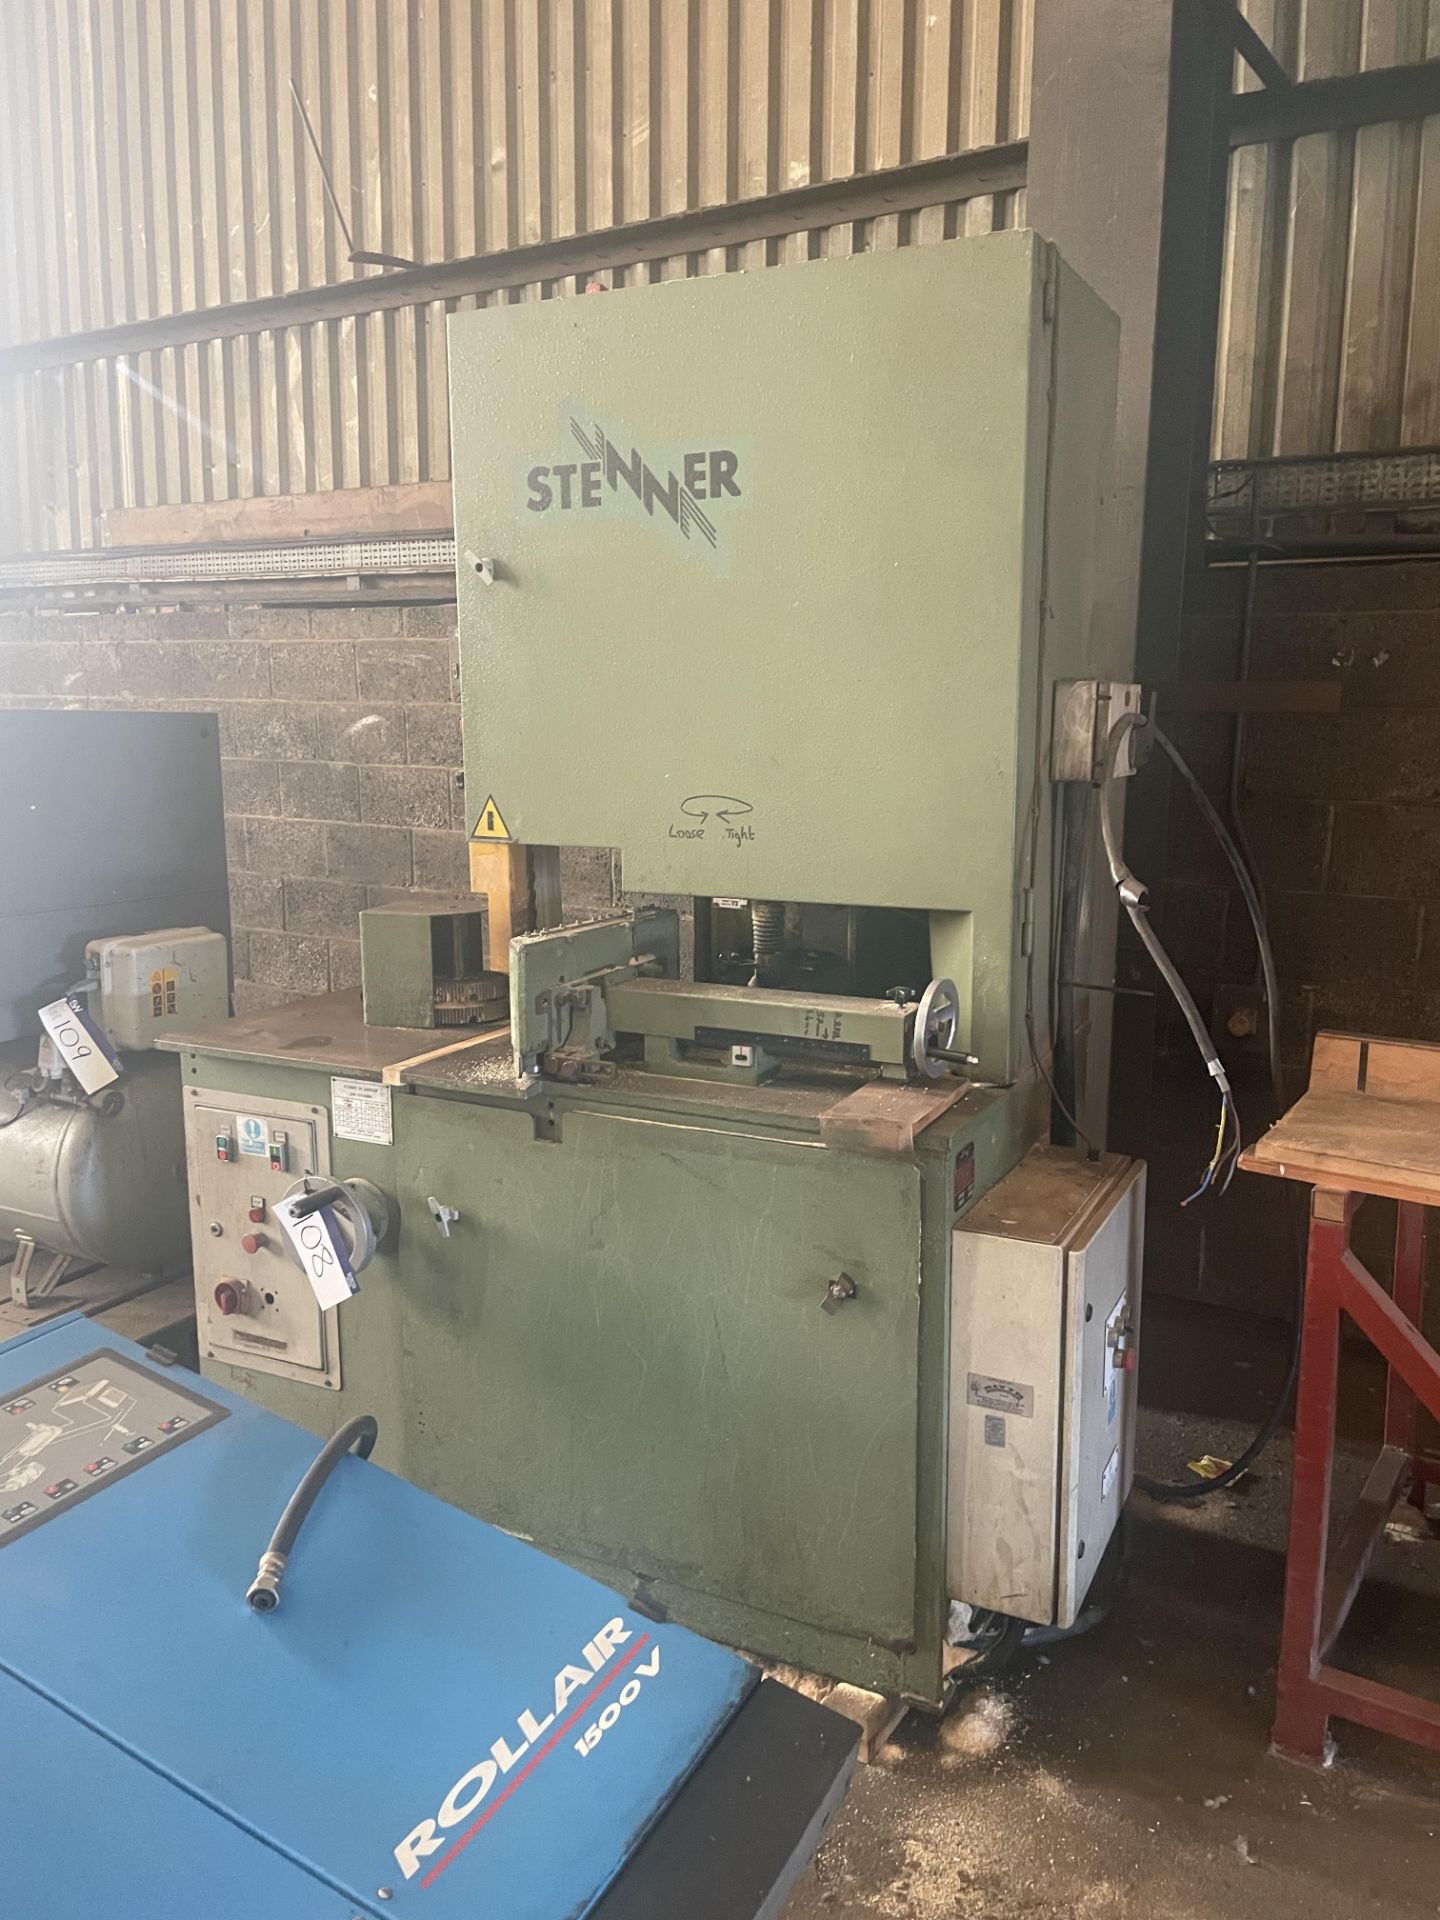 Stenner EAGLE 36 VERTICAL RESAW, serial no. 9387, lot located at Cochranes Wharf, Dockside Rd, - Bild 2 aus 8